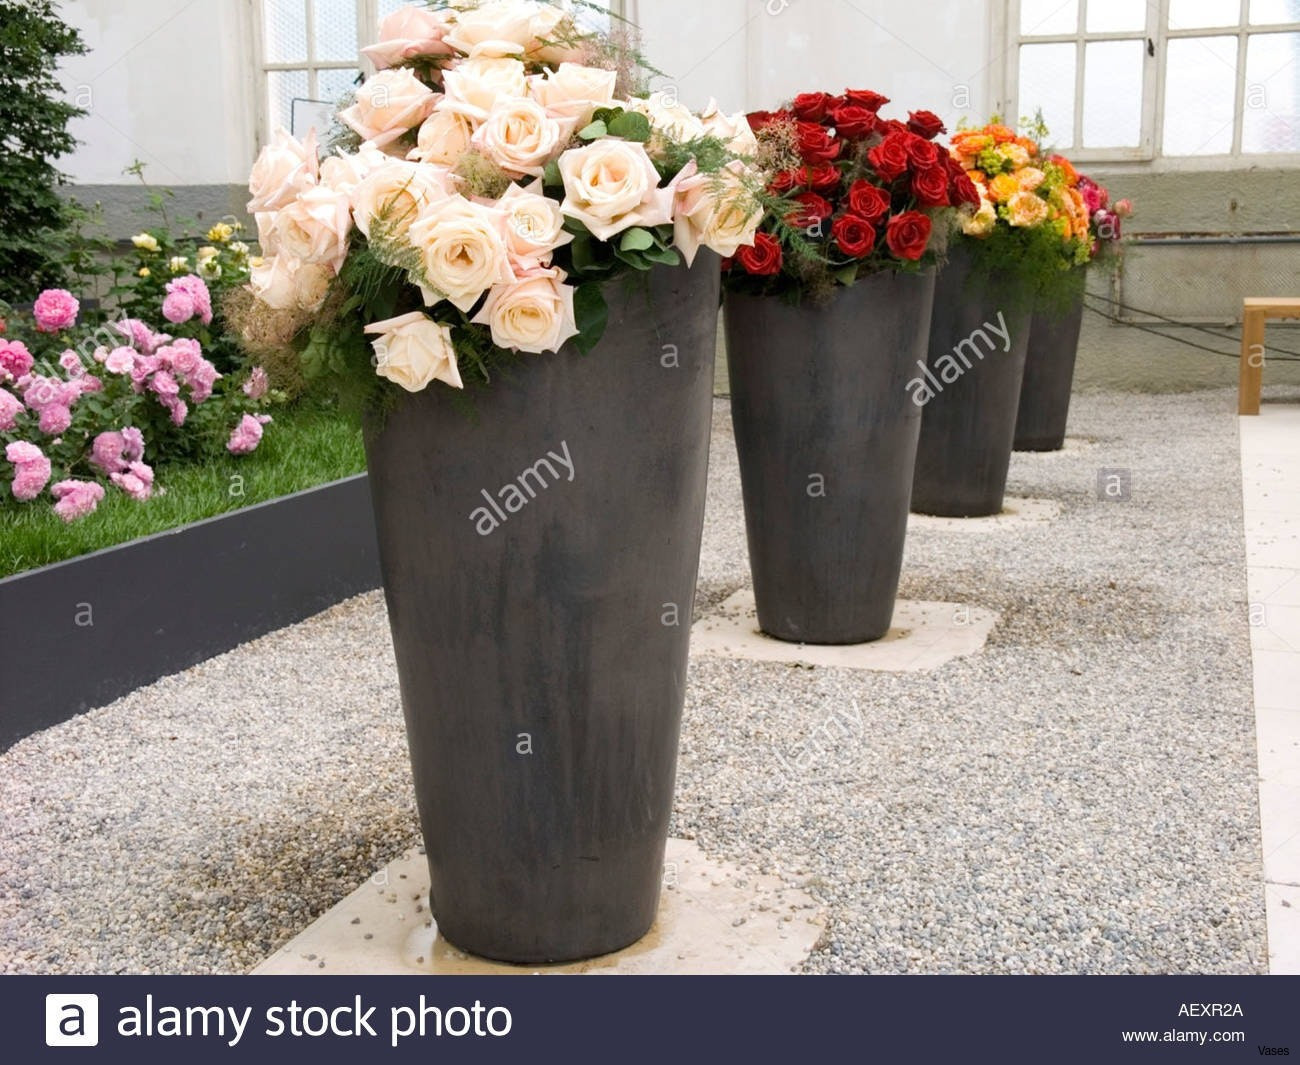 28 Cute Flower Vase Photos 2023 free download flower vase photos of wedding photos uk lovely articles with flower vases for sale tag big pertaining to articles with flower vases for sale tag big vase l vasei 0d uk